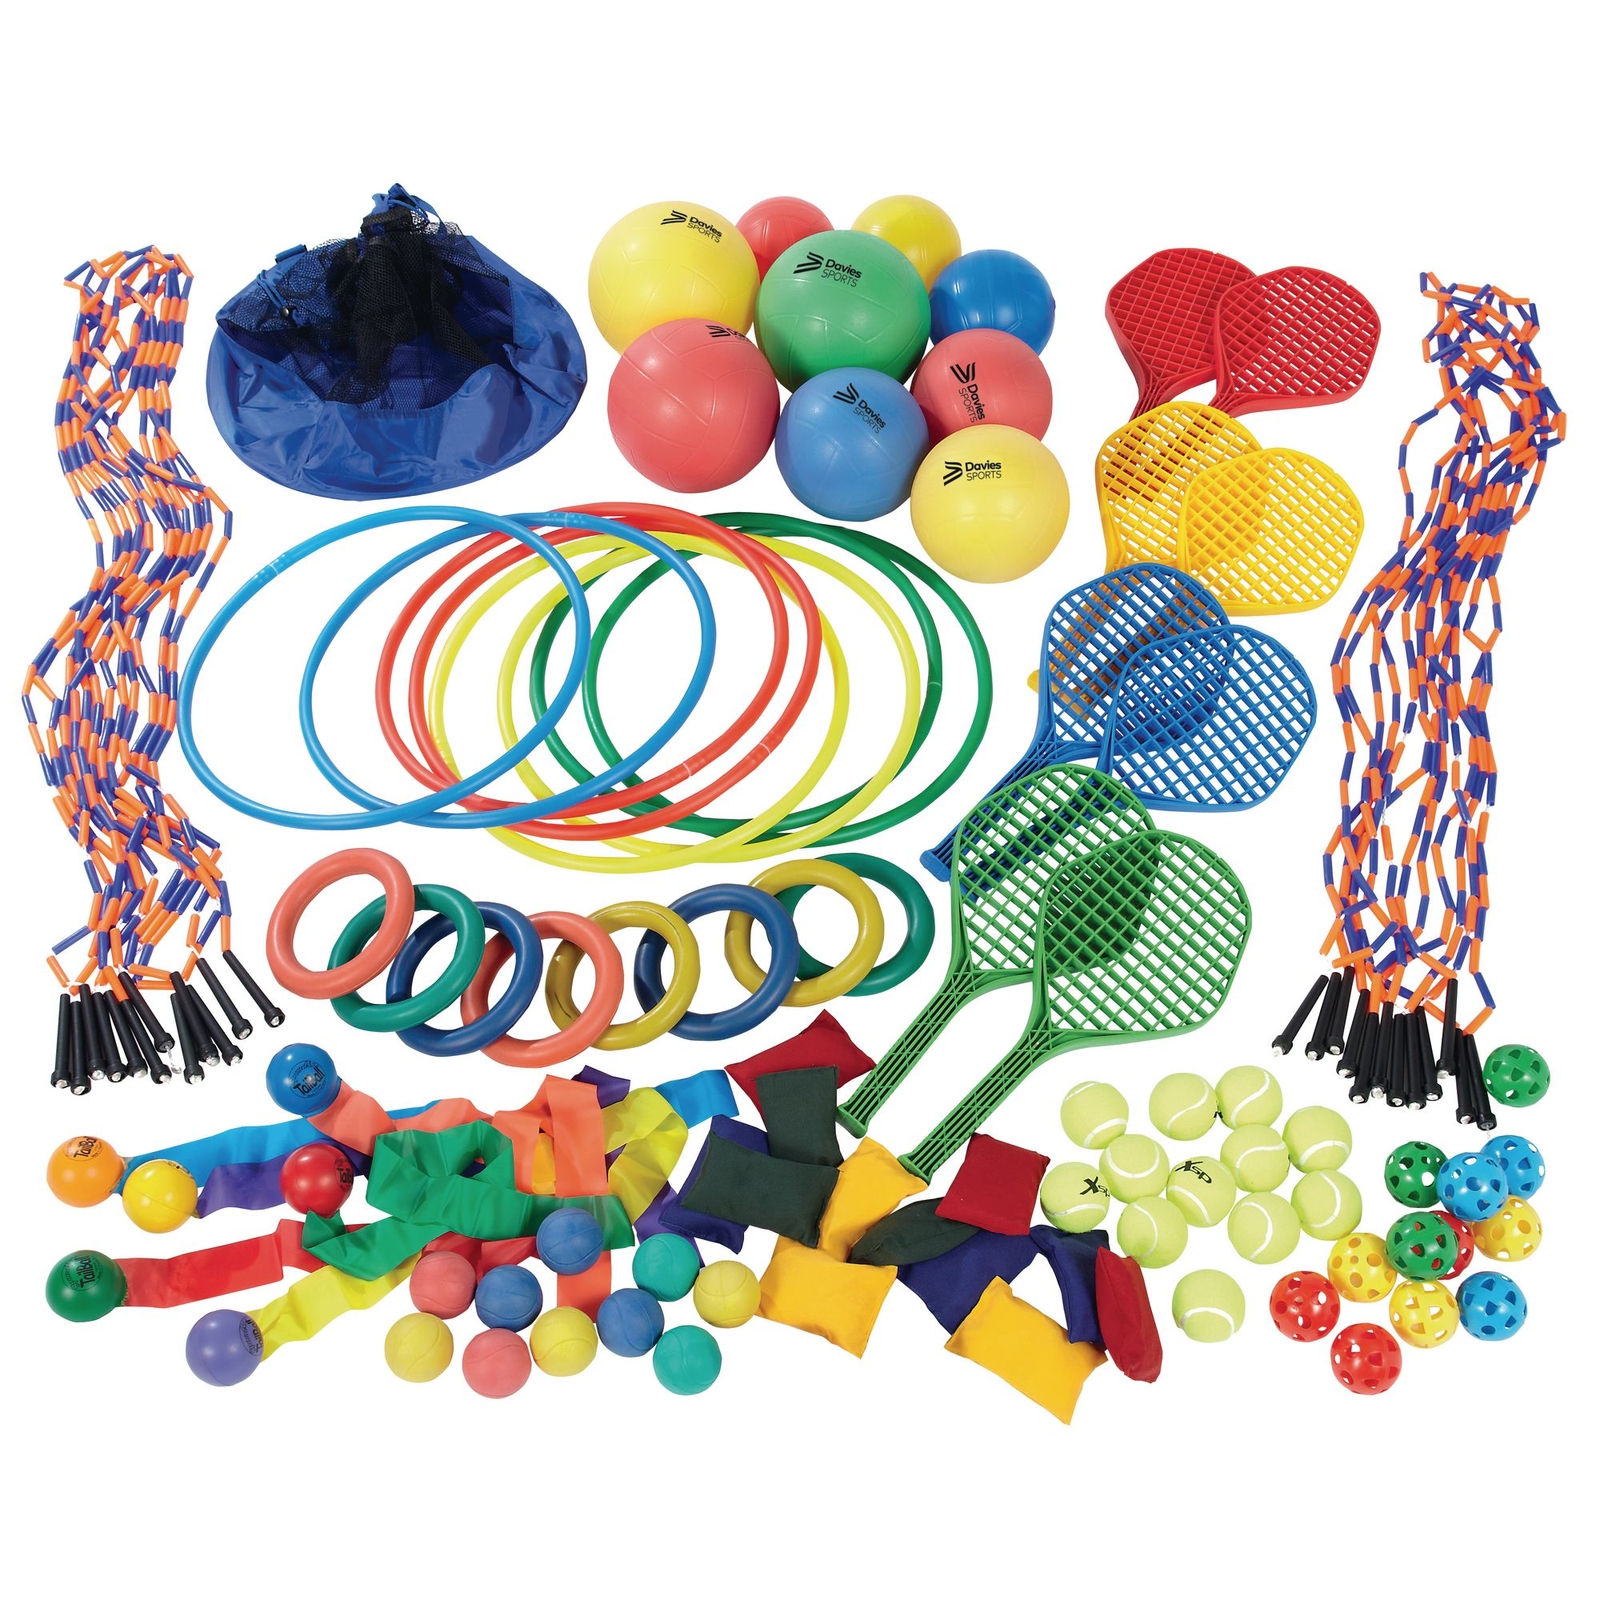 Super Budget Playground Pack - Assorted - Per Pack